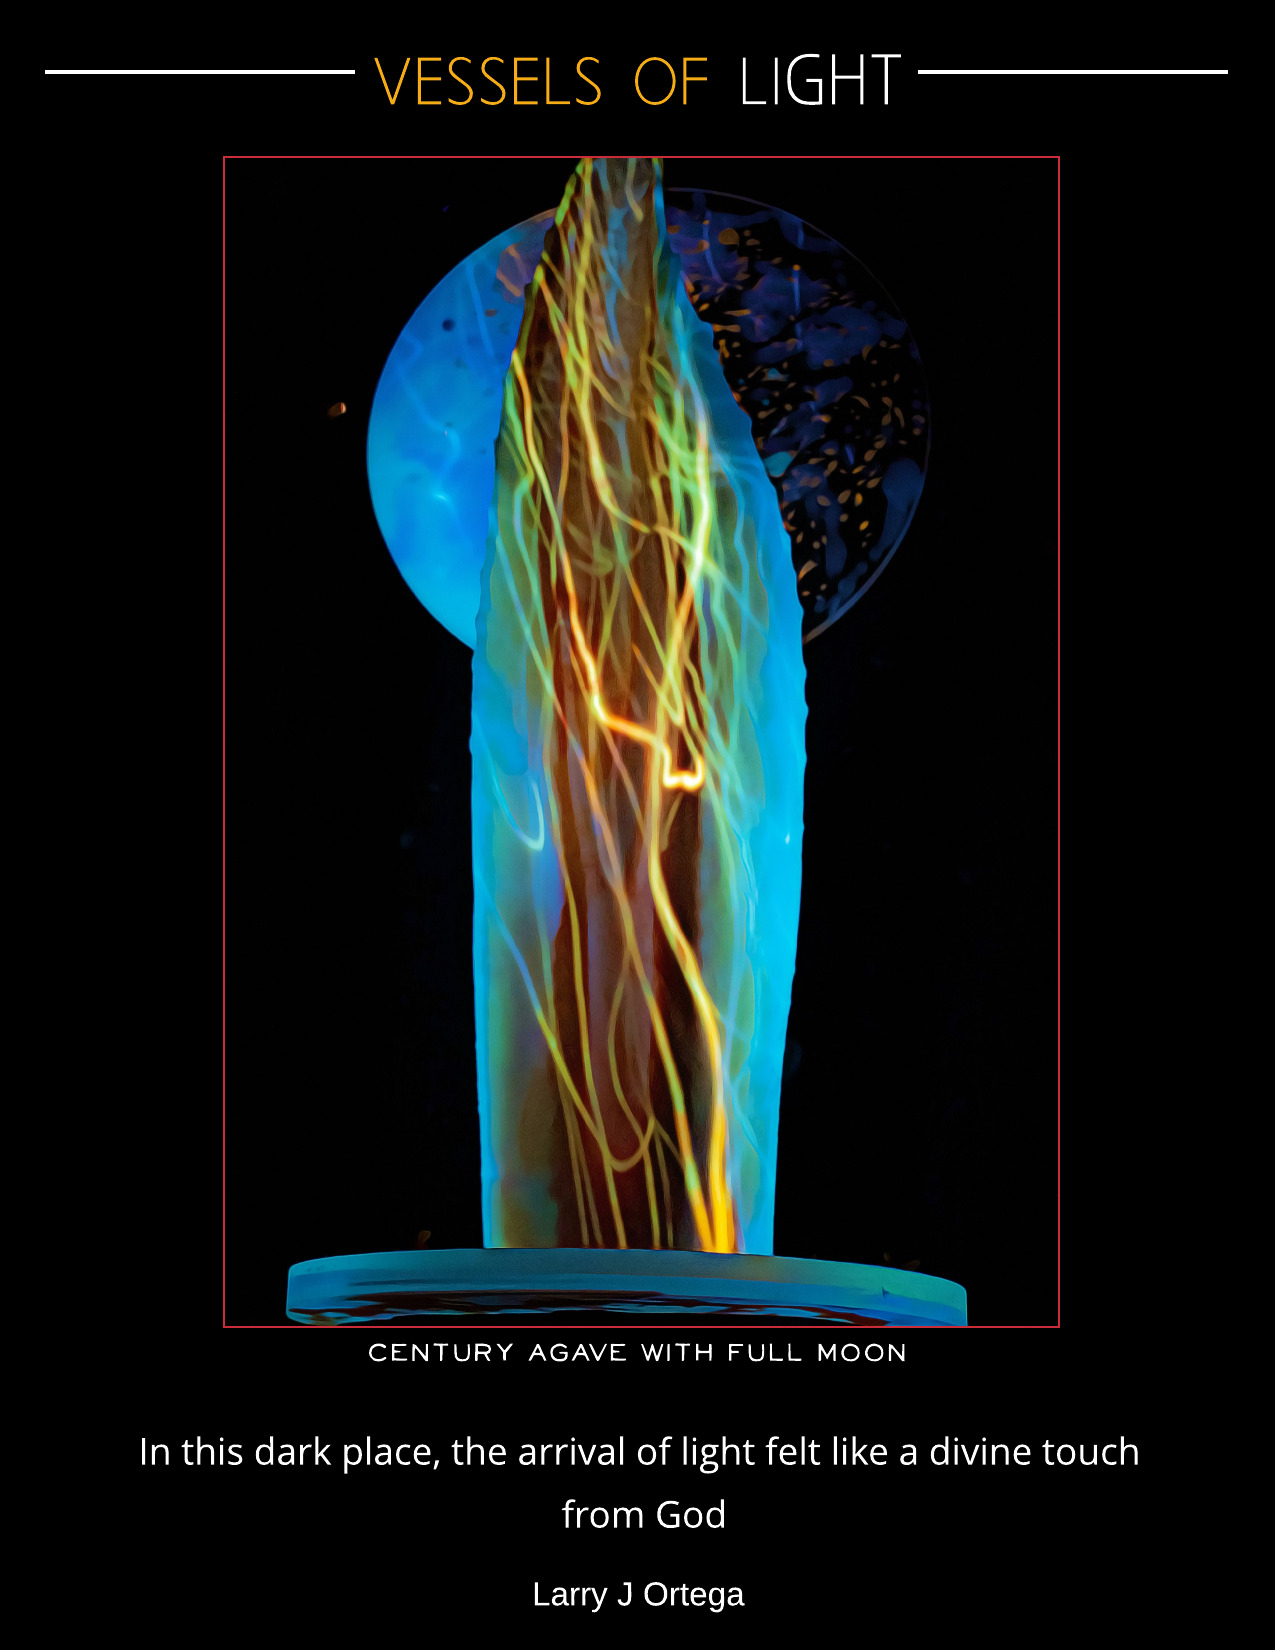 image of glowing sculpture